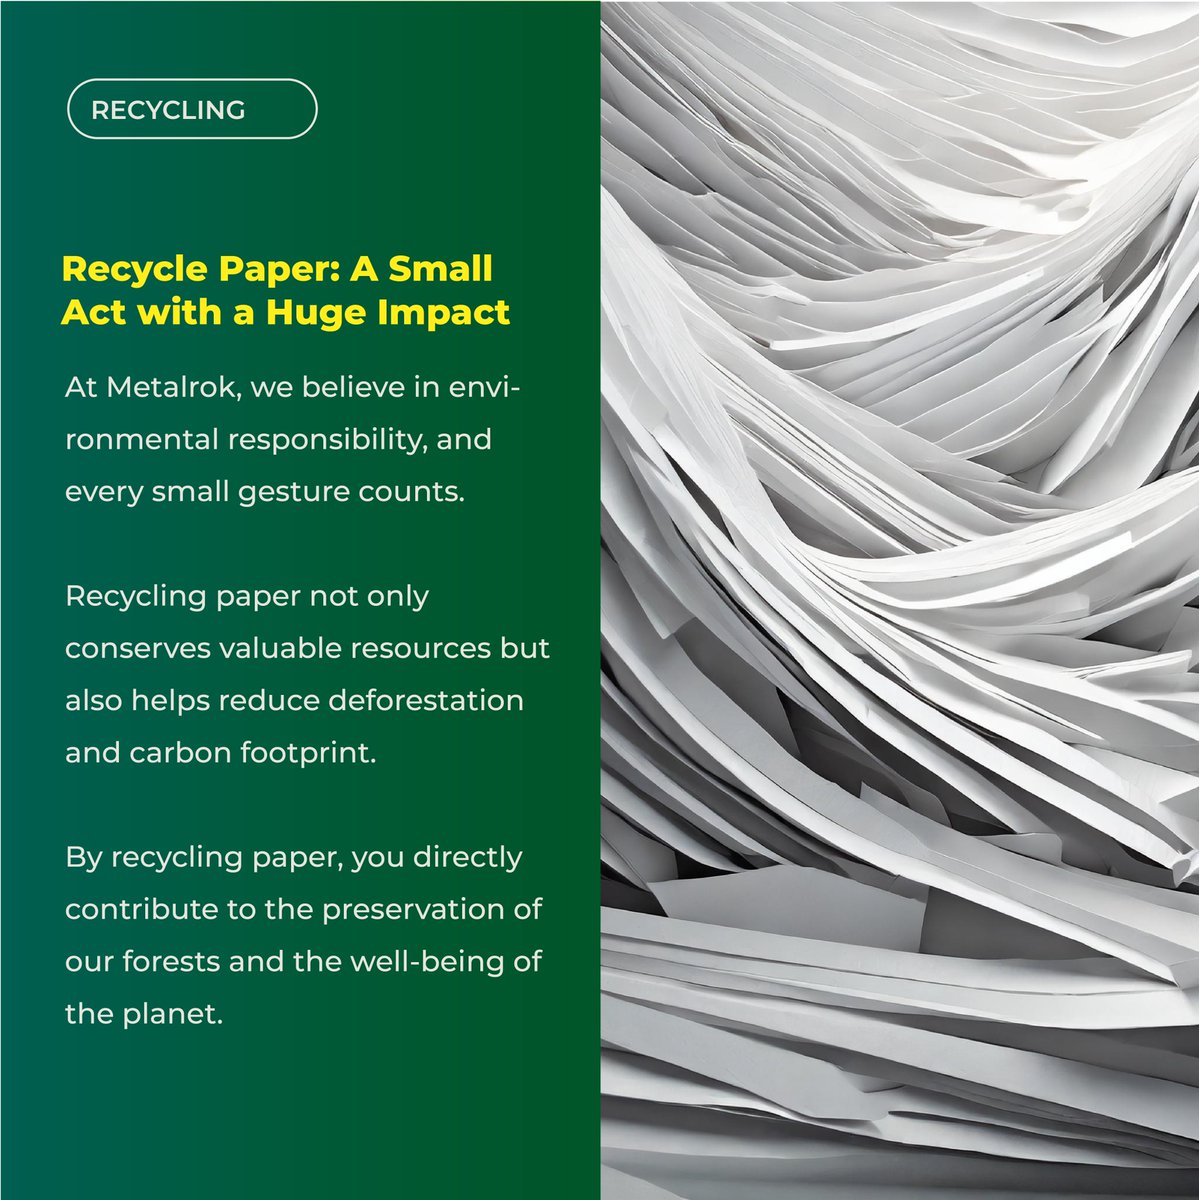 Join us in this sustainable commitment. Recycle paper and be part of the positive change our world needs! #Recycling #Sustainability ⁠#metalrokCommitted